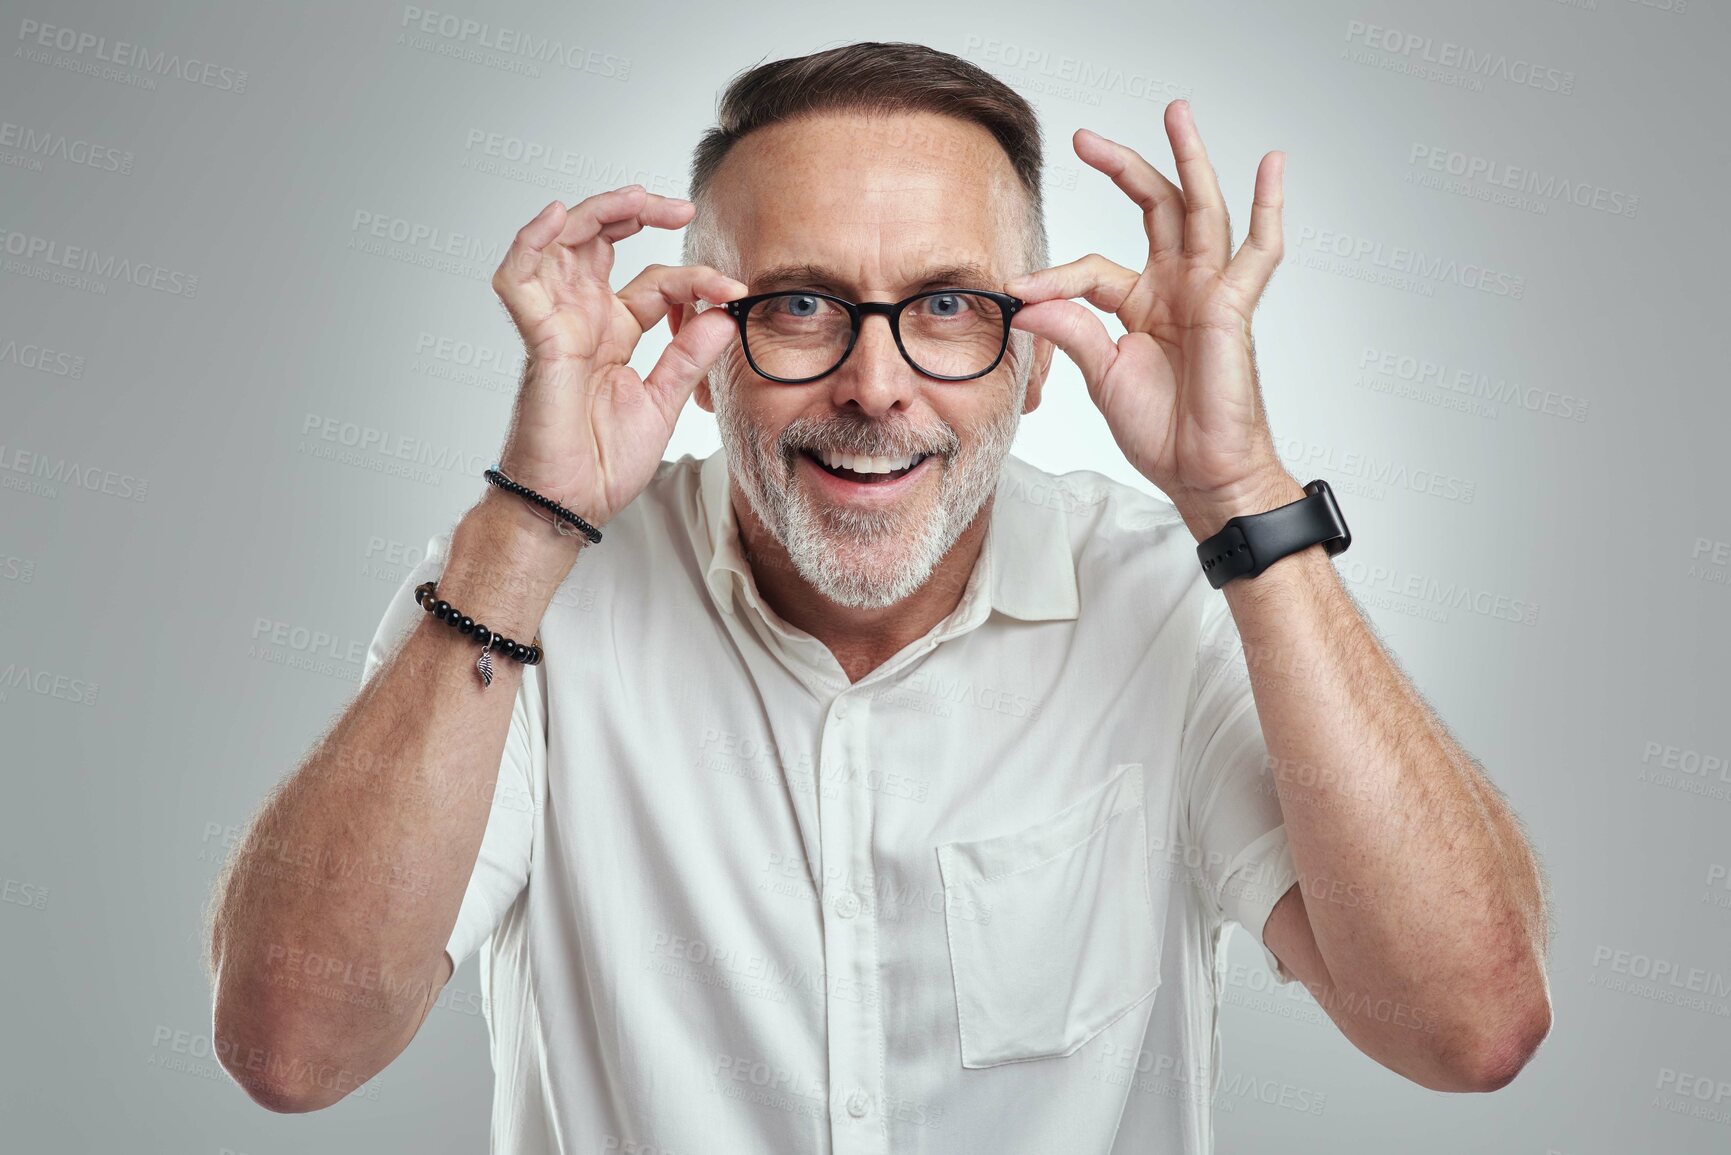 Buy stock photo Studio portrait of a mature man wearing spectacles against a grey background